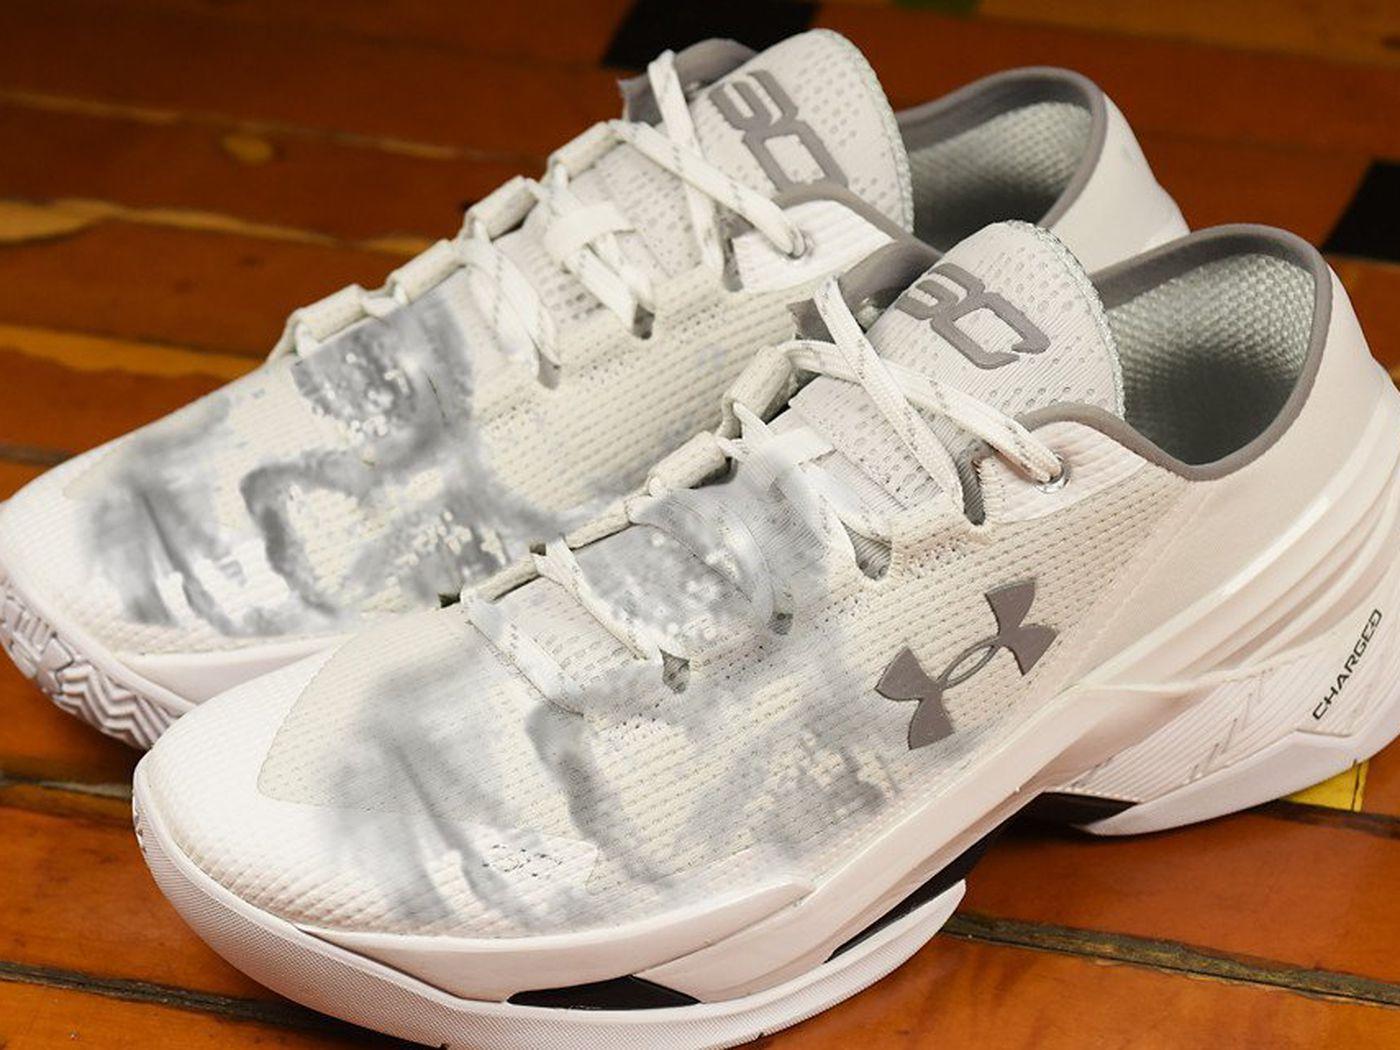 Steph Curry released some ugly shoes and people are ruthlessly